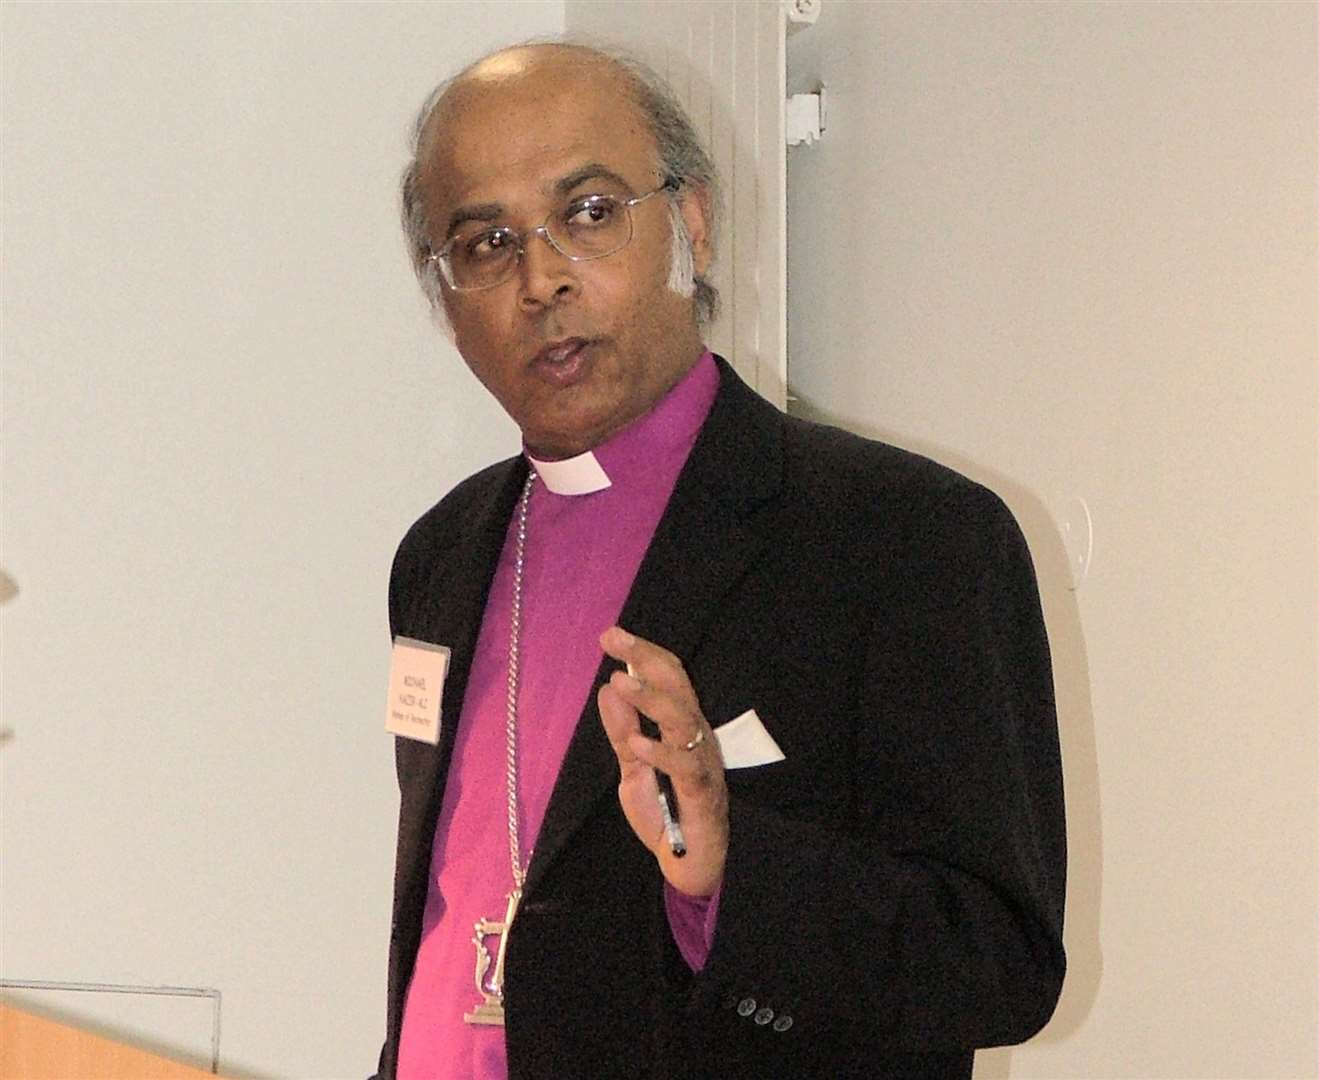 The former Bishop of Rochester, Michael Nazir-Ali